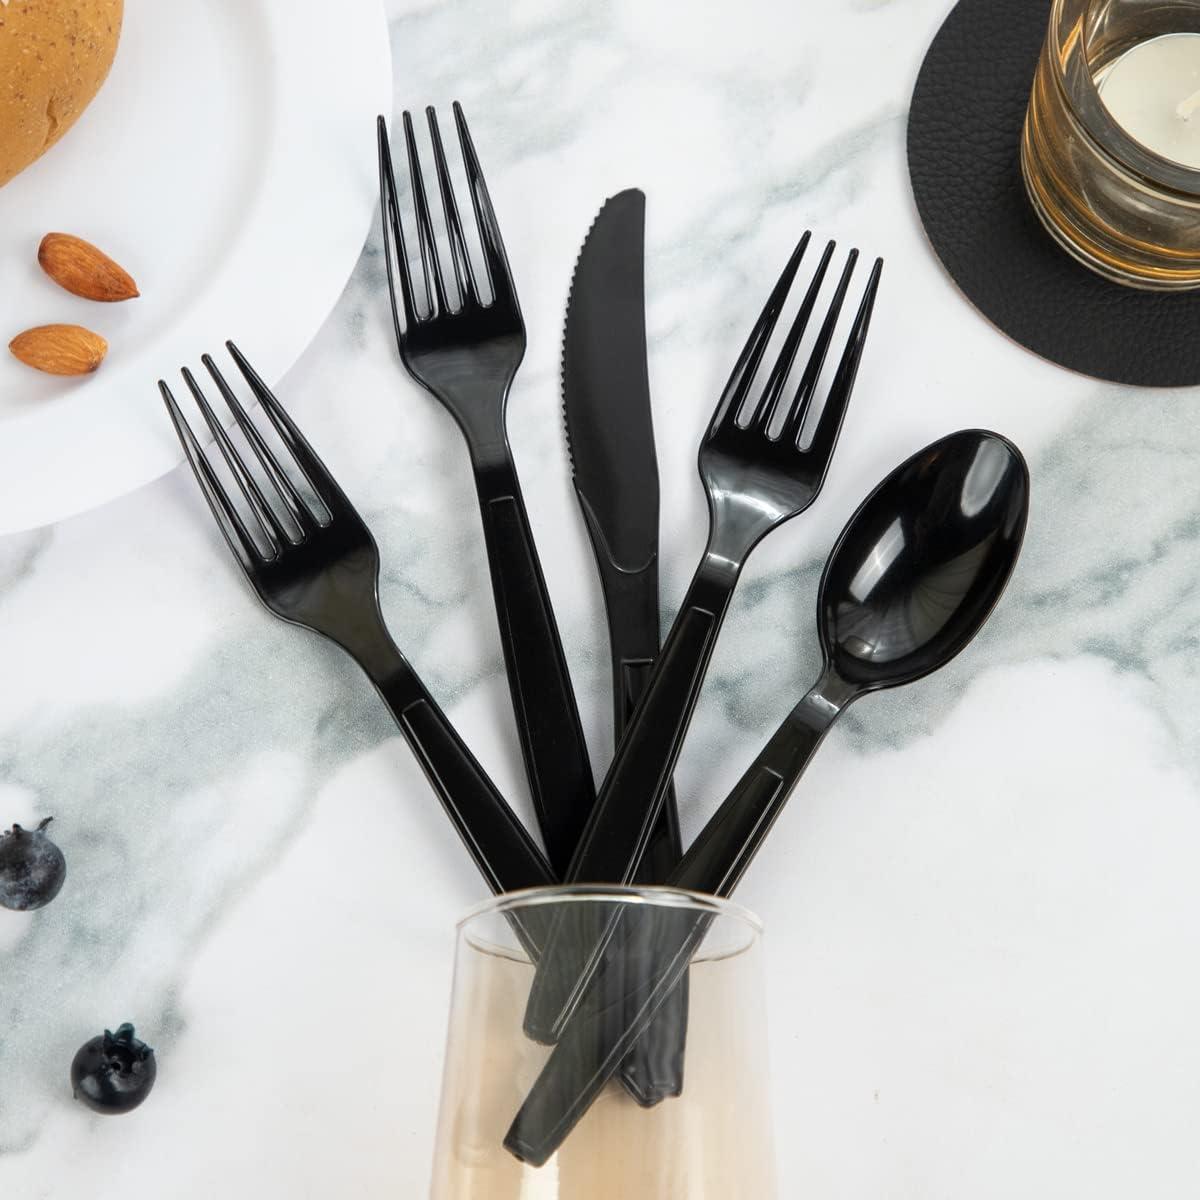 Disposable, Plastic Cutlery and Knives